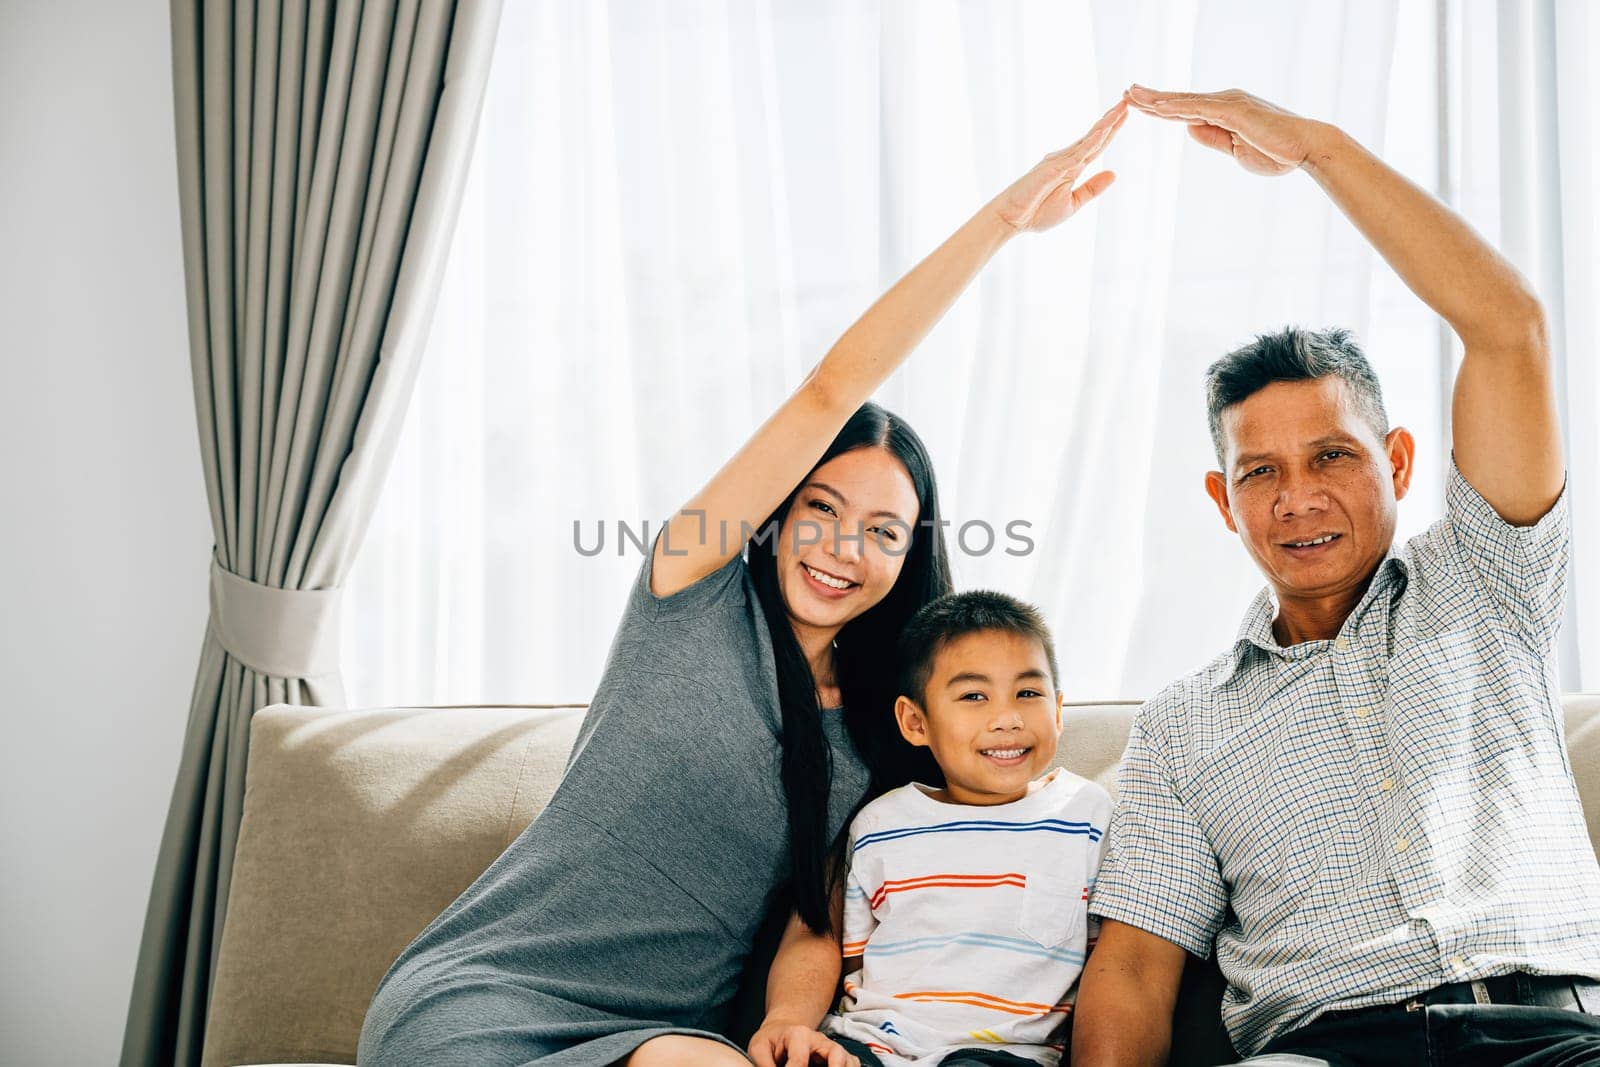 A joyful family poses on a sofa parents making a roof gesture above their little son by Sorapop